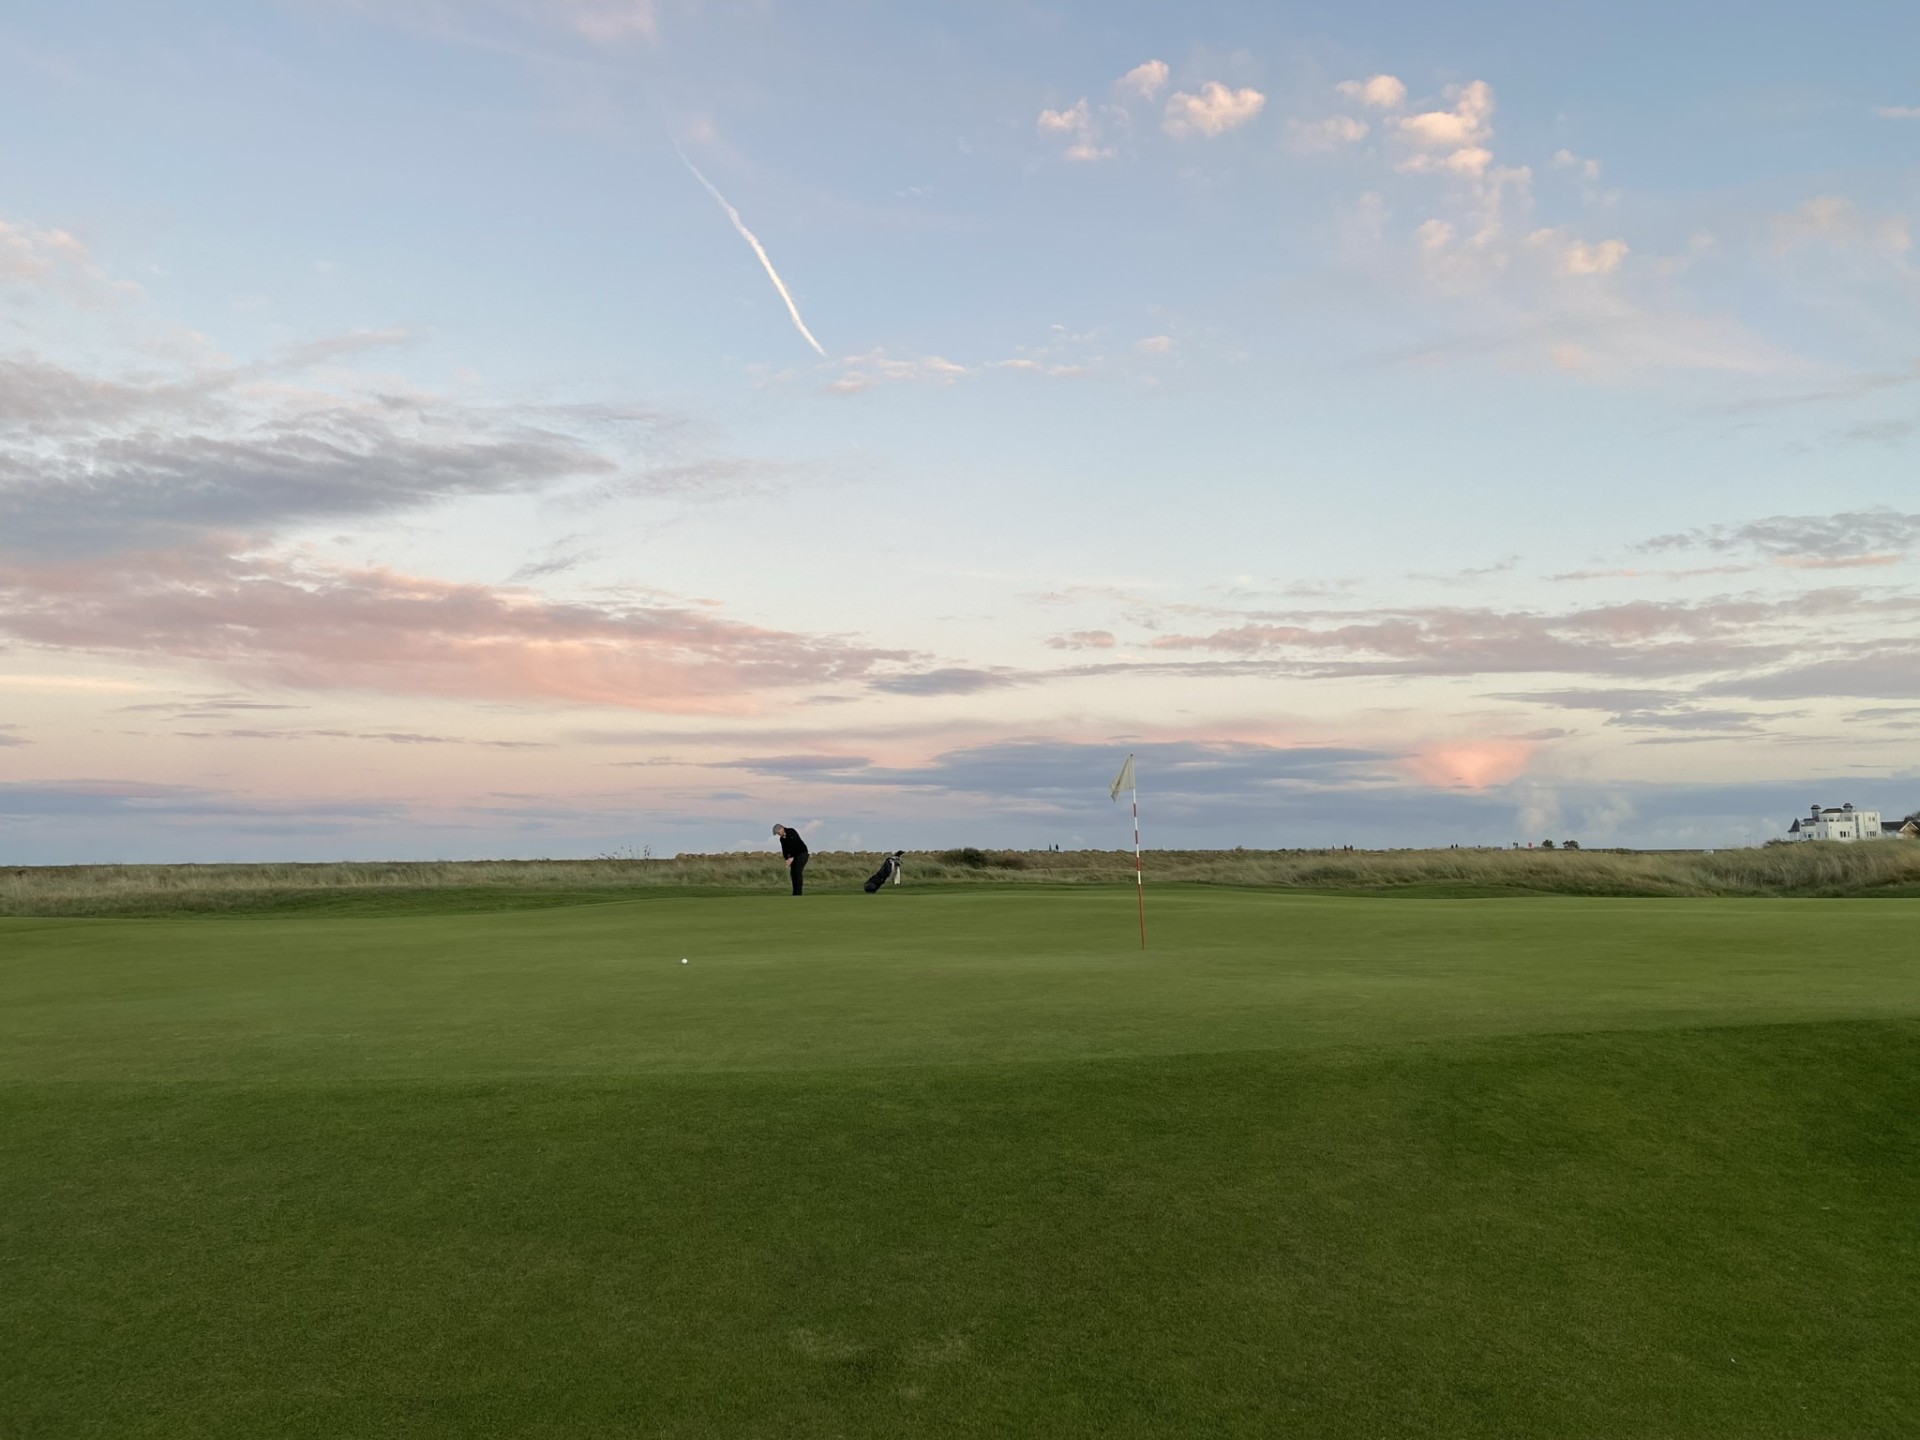 Royal Cinque Ports Golf Club has taken steps in response to the feedback, such as having a starter and a marshal out on the golf course during visitor days.